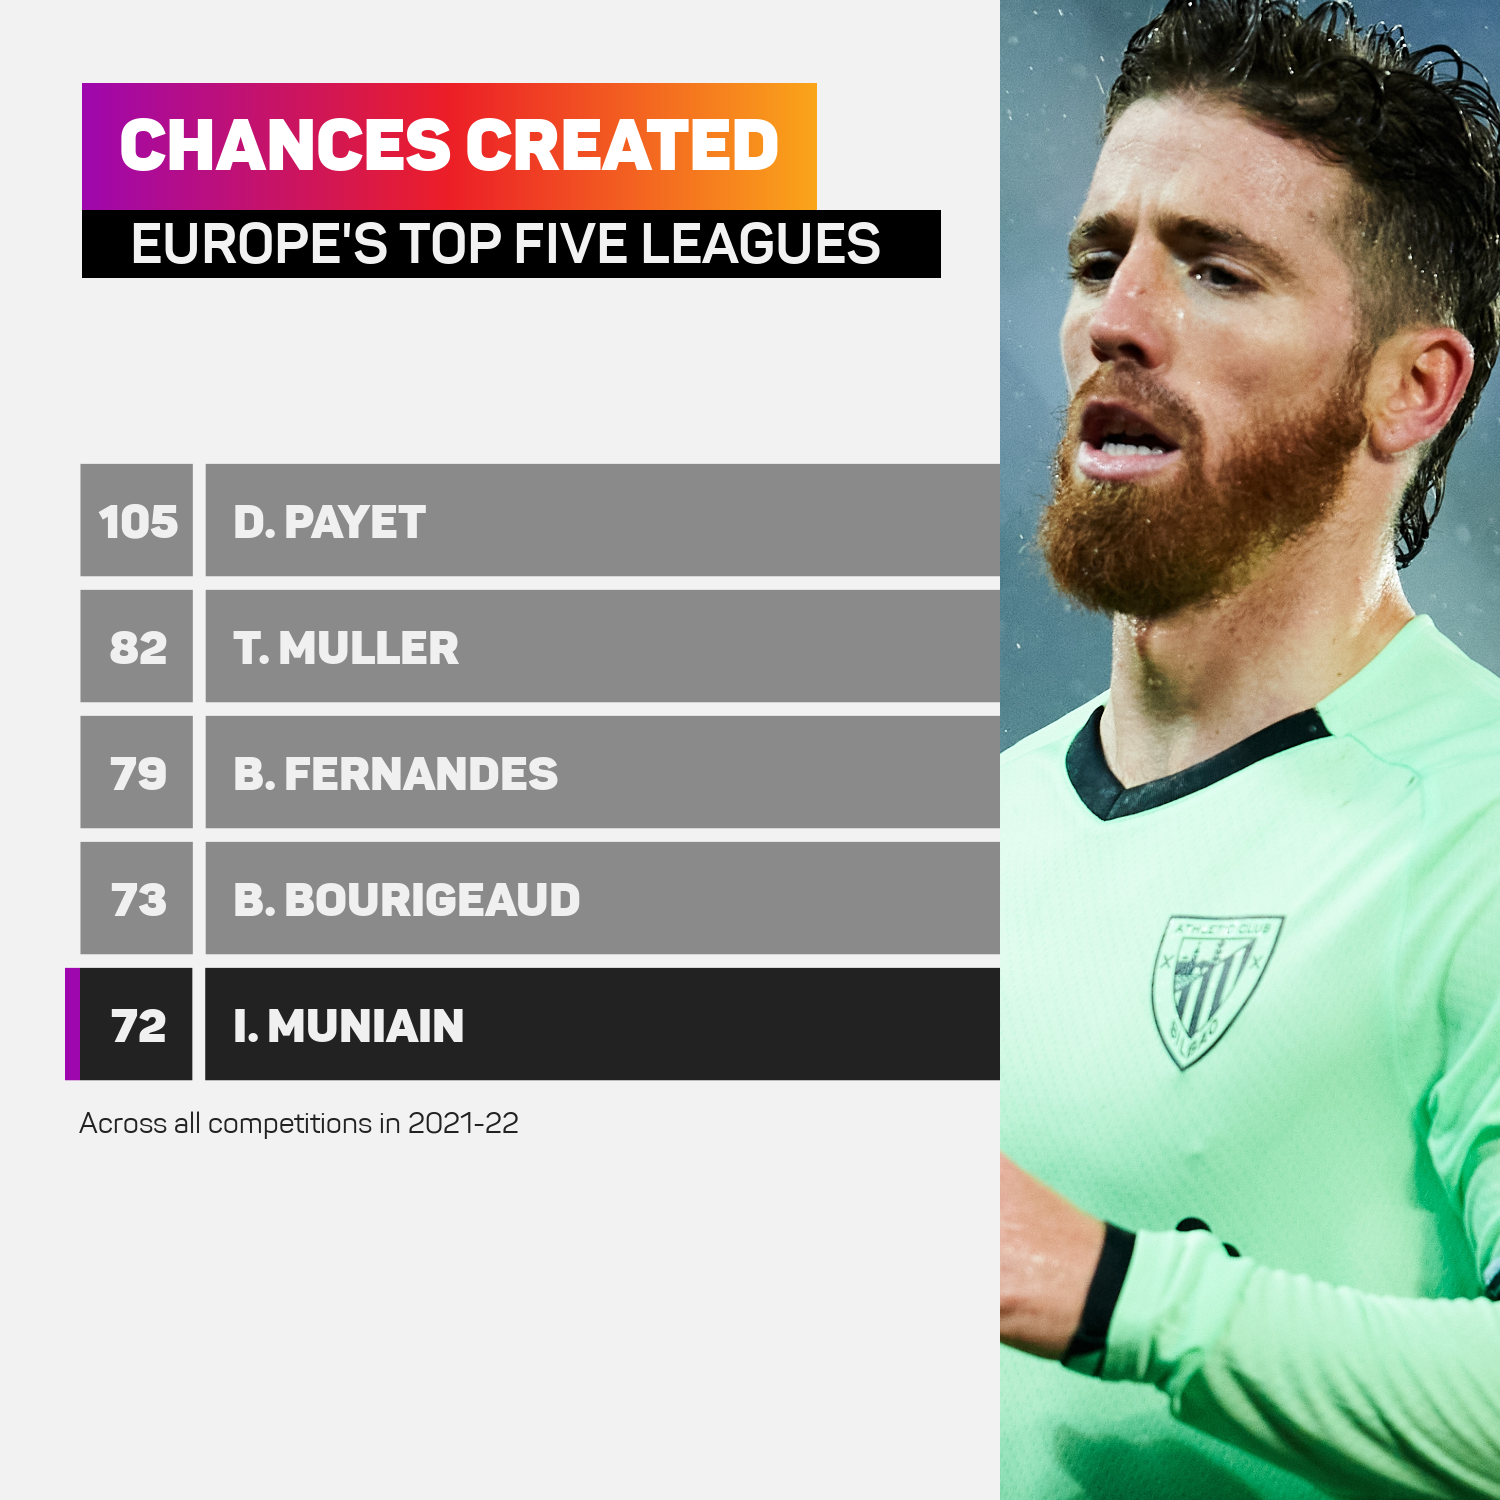 Chances created in Europe's top five leagues as of 29012022